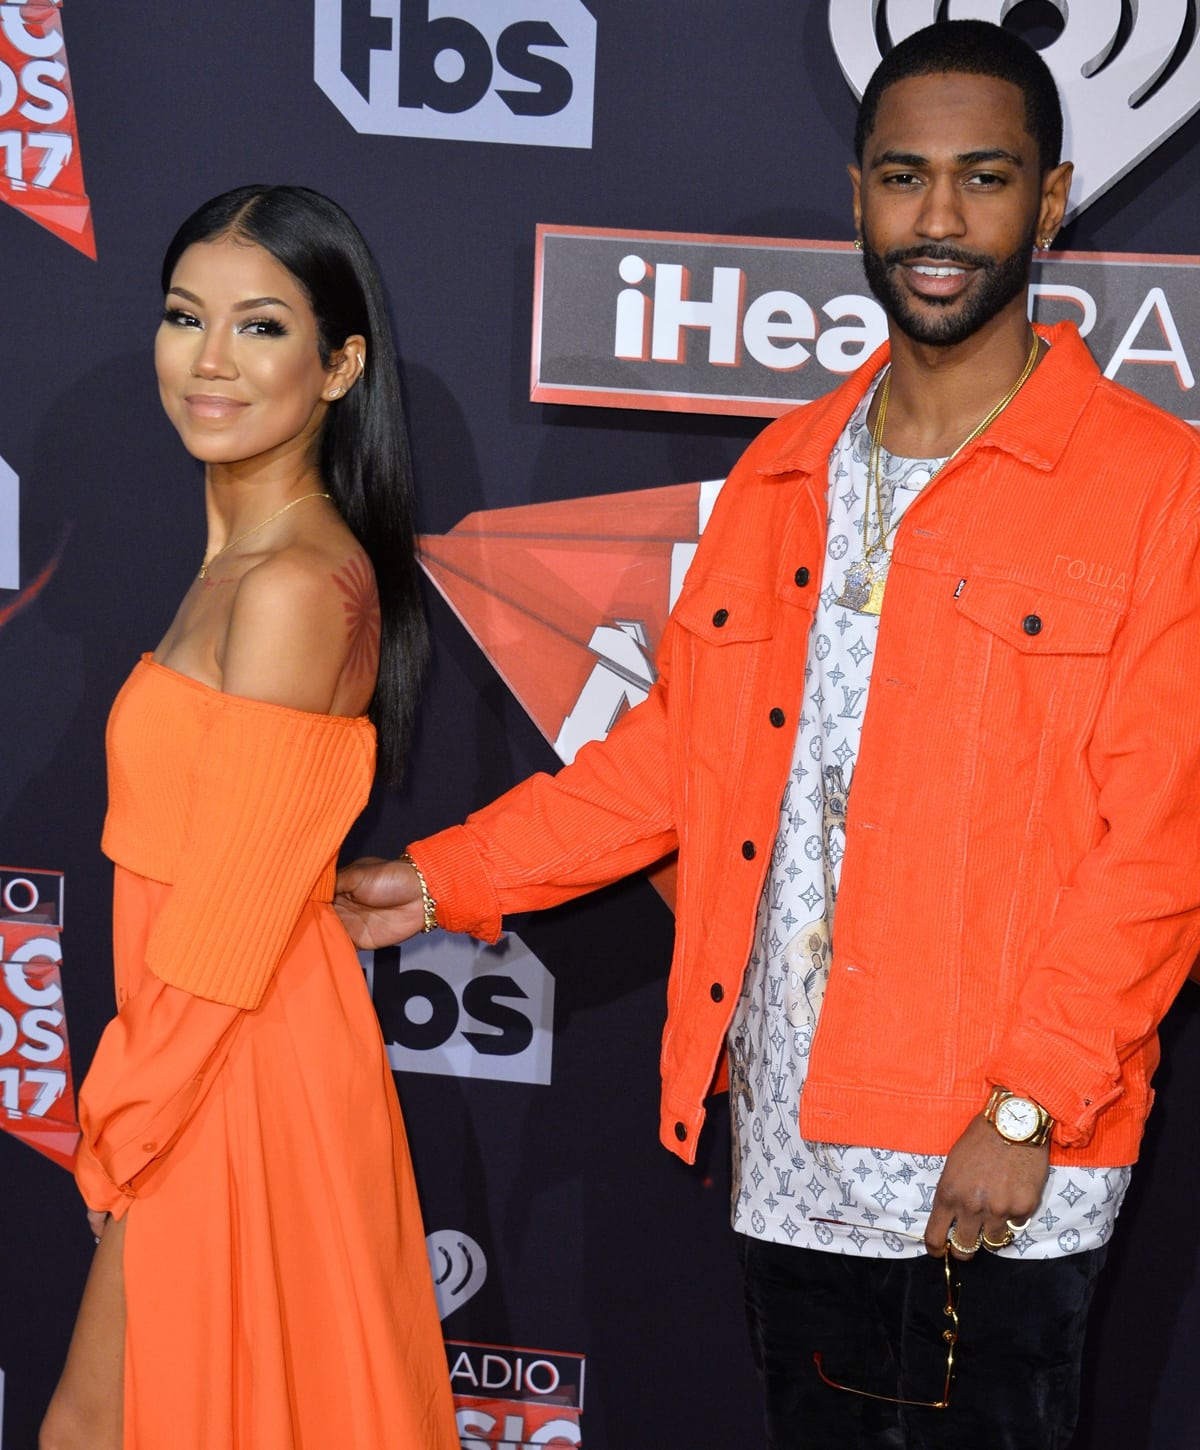 Big Sean and Jhené Aiko started dating in 2016 following her divorce from Dot Da Genius